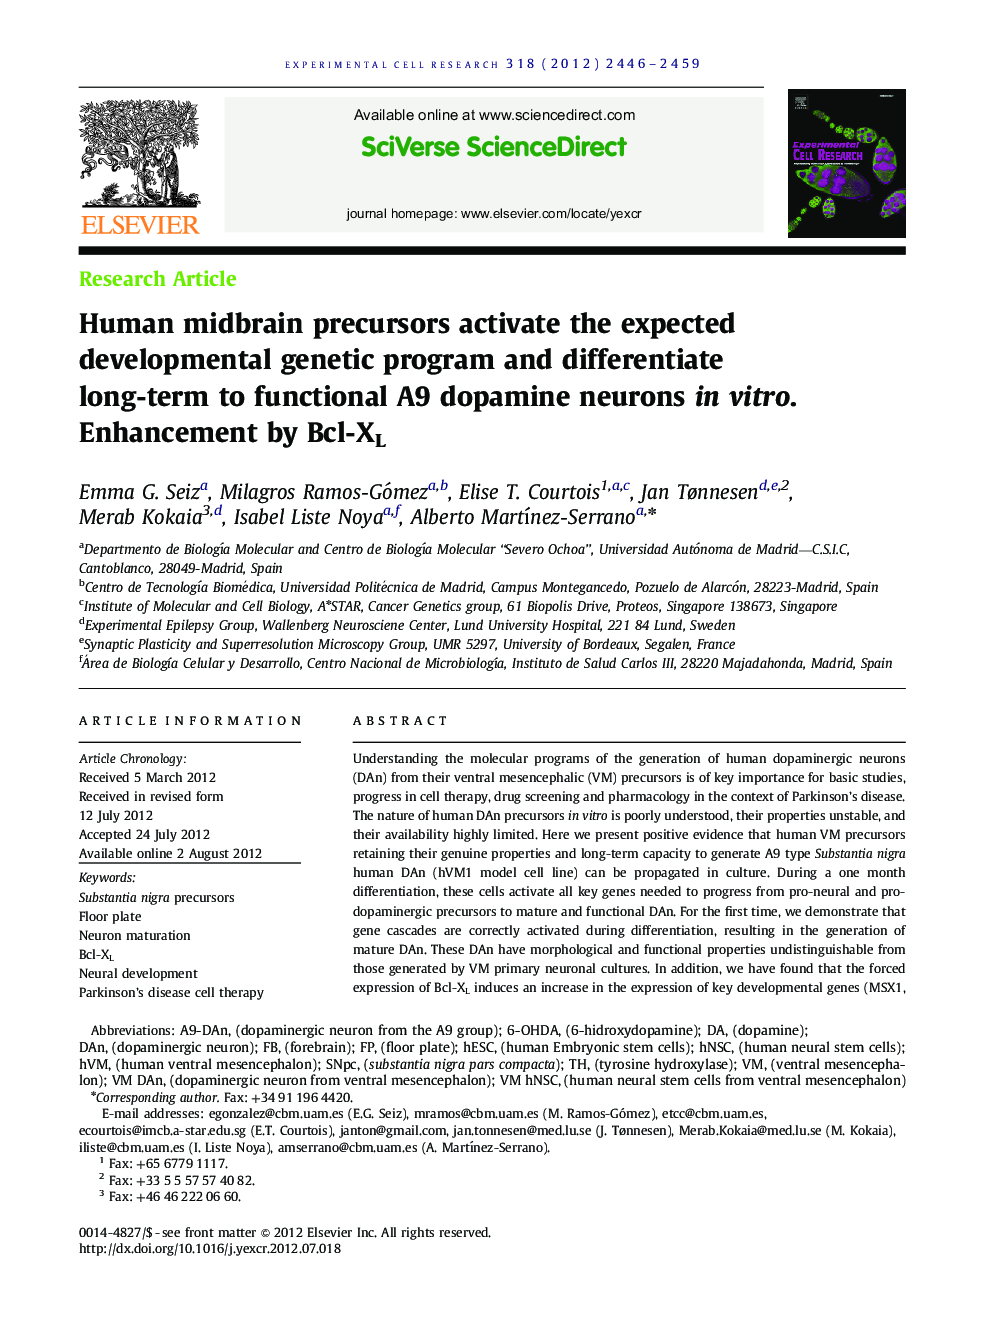 Human midbrain precursors activate the expected developmental genetic program and differentiate long-term to functional A9 dopamine neurons in vitro. Enhancement by Bcl-XL